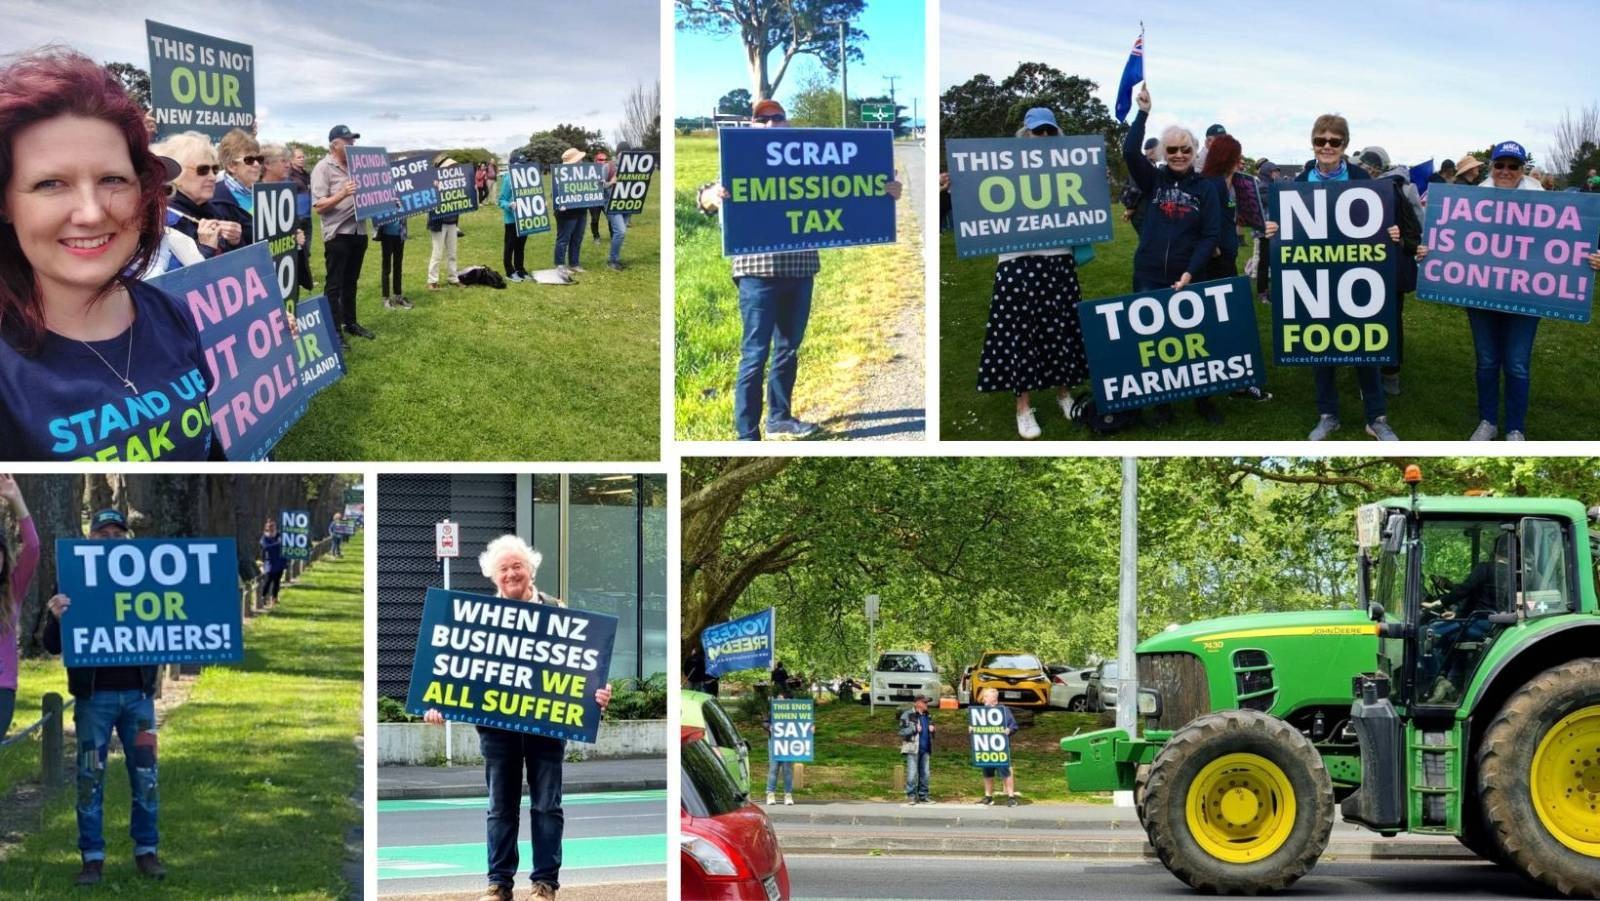 VFF supporters standing up for farmers in the recent 'We're Not Going To Take It' protest in October 2022